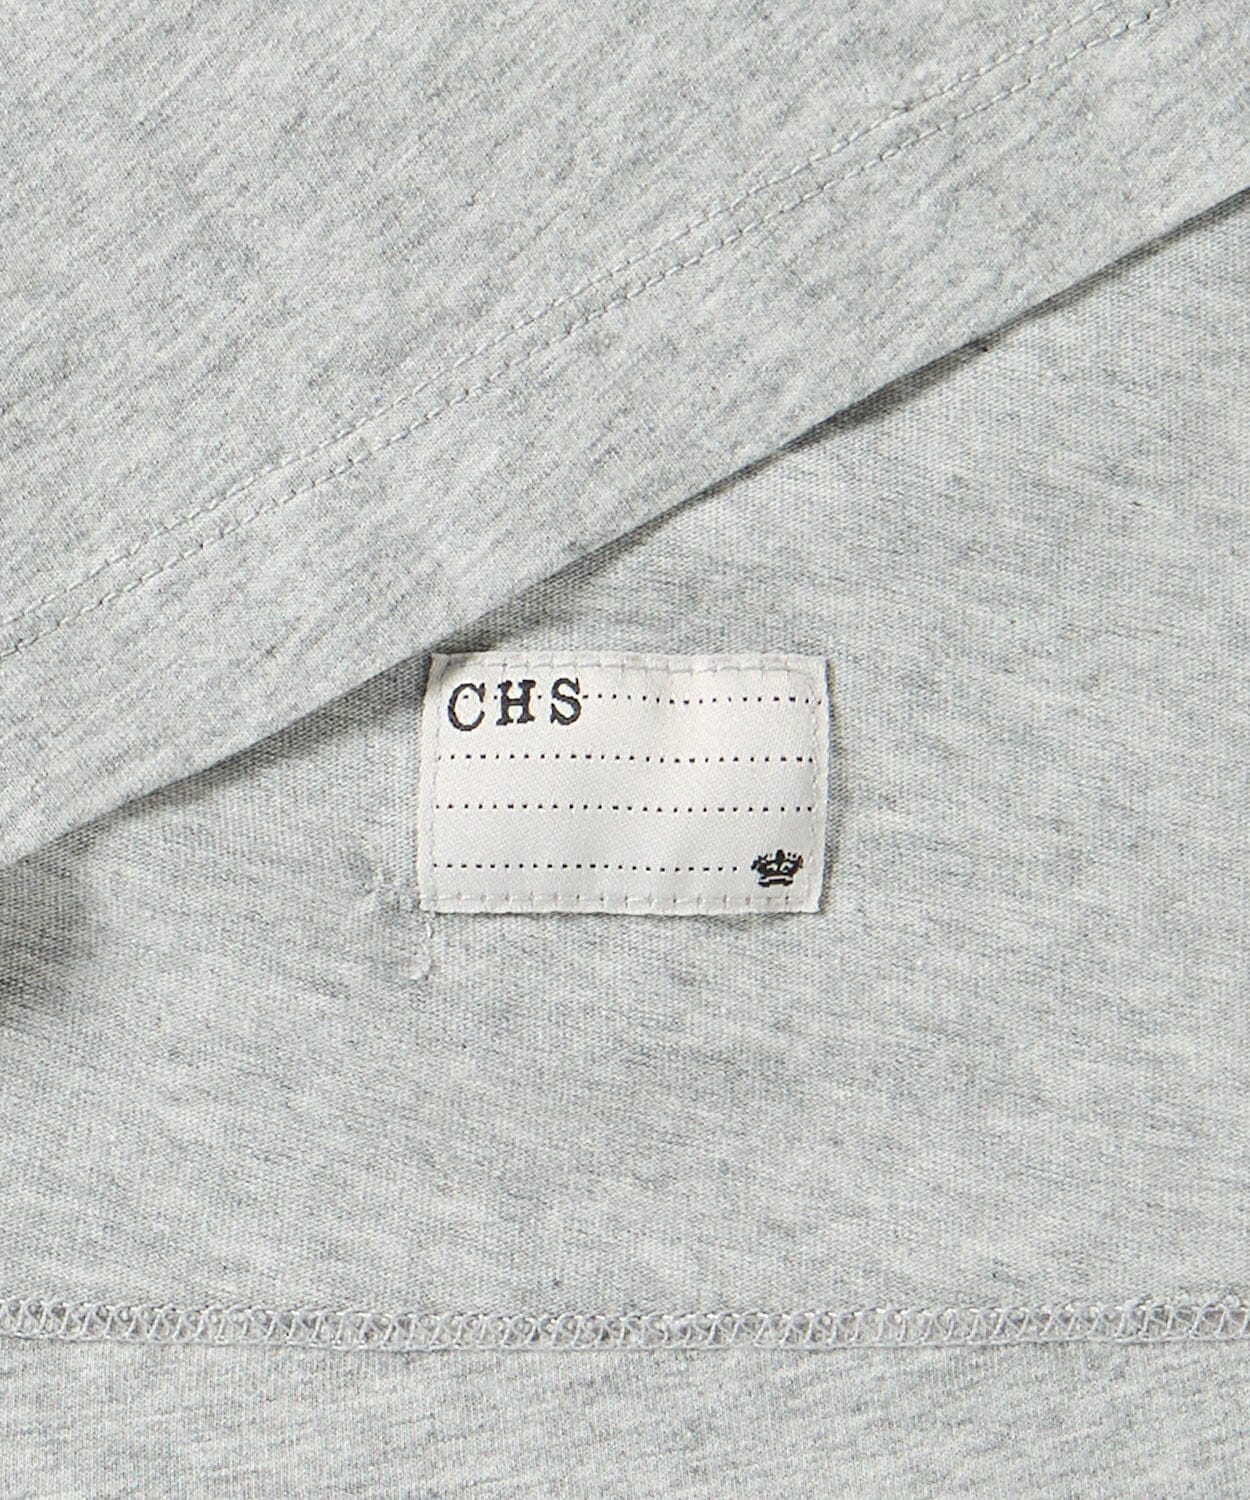 detail of a graphic tee that says charles town, sc